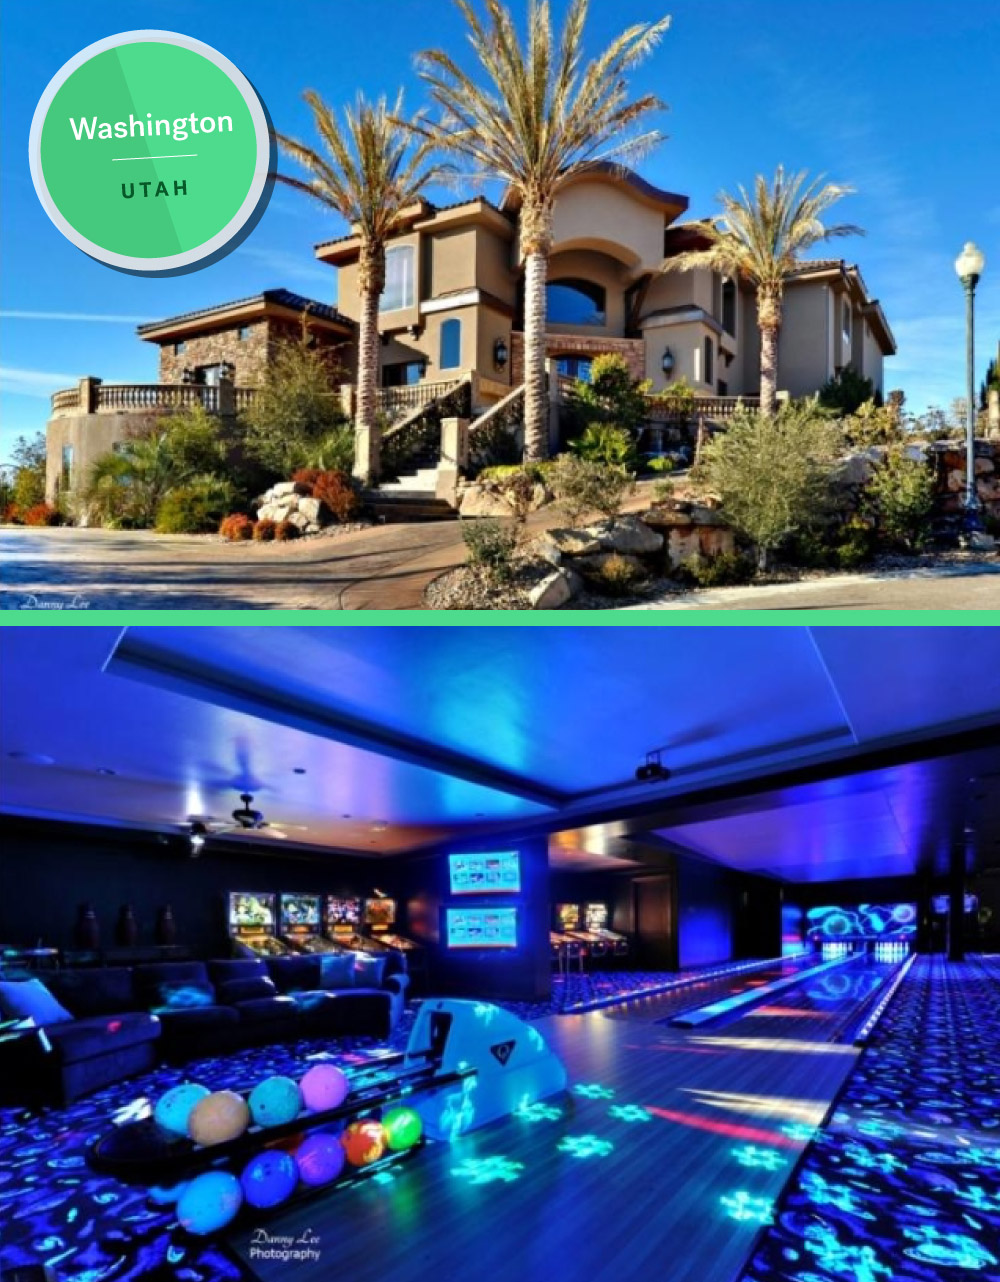 The Dude Abides: 13 Homes for Sale With Bowling Alleys ...